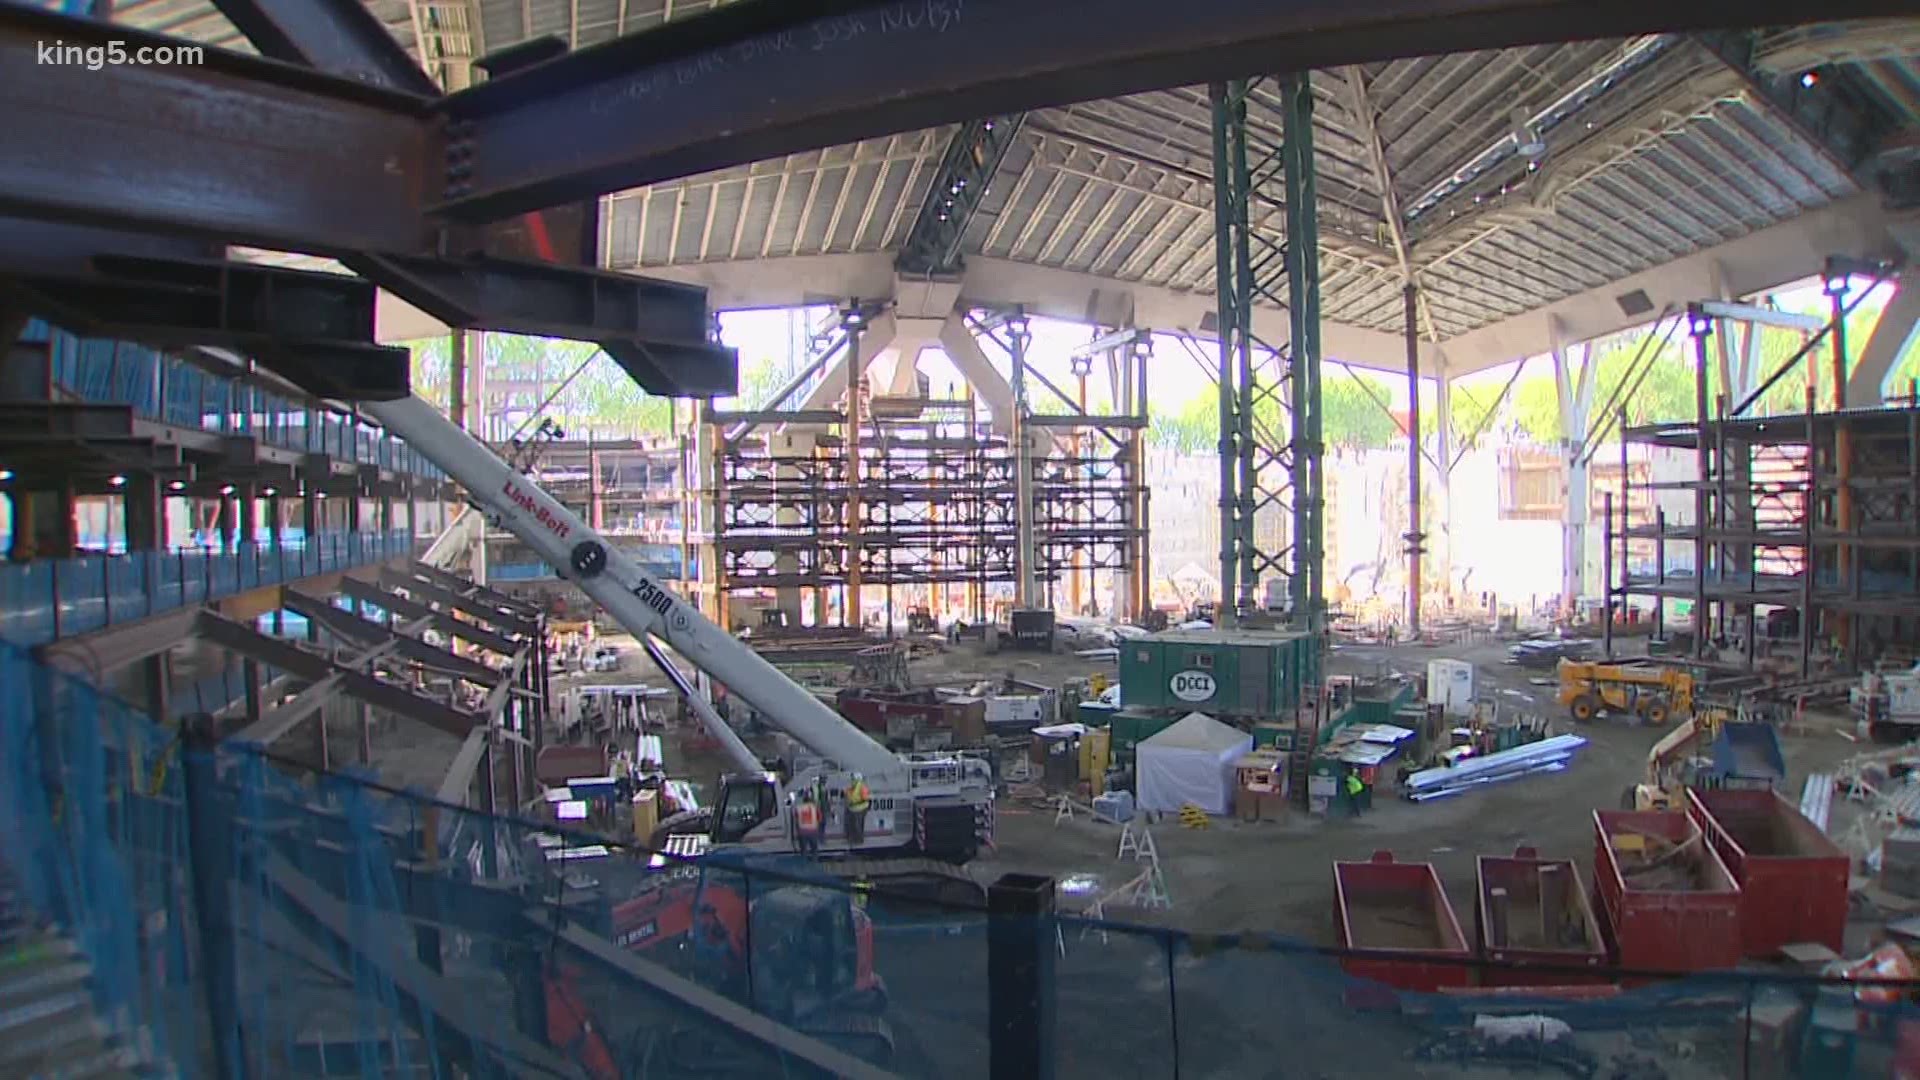 Seattle's old KeyArena is history and the new Climate Pledge Arena is taking shape. Take a look inside the construction progress.